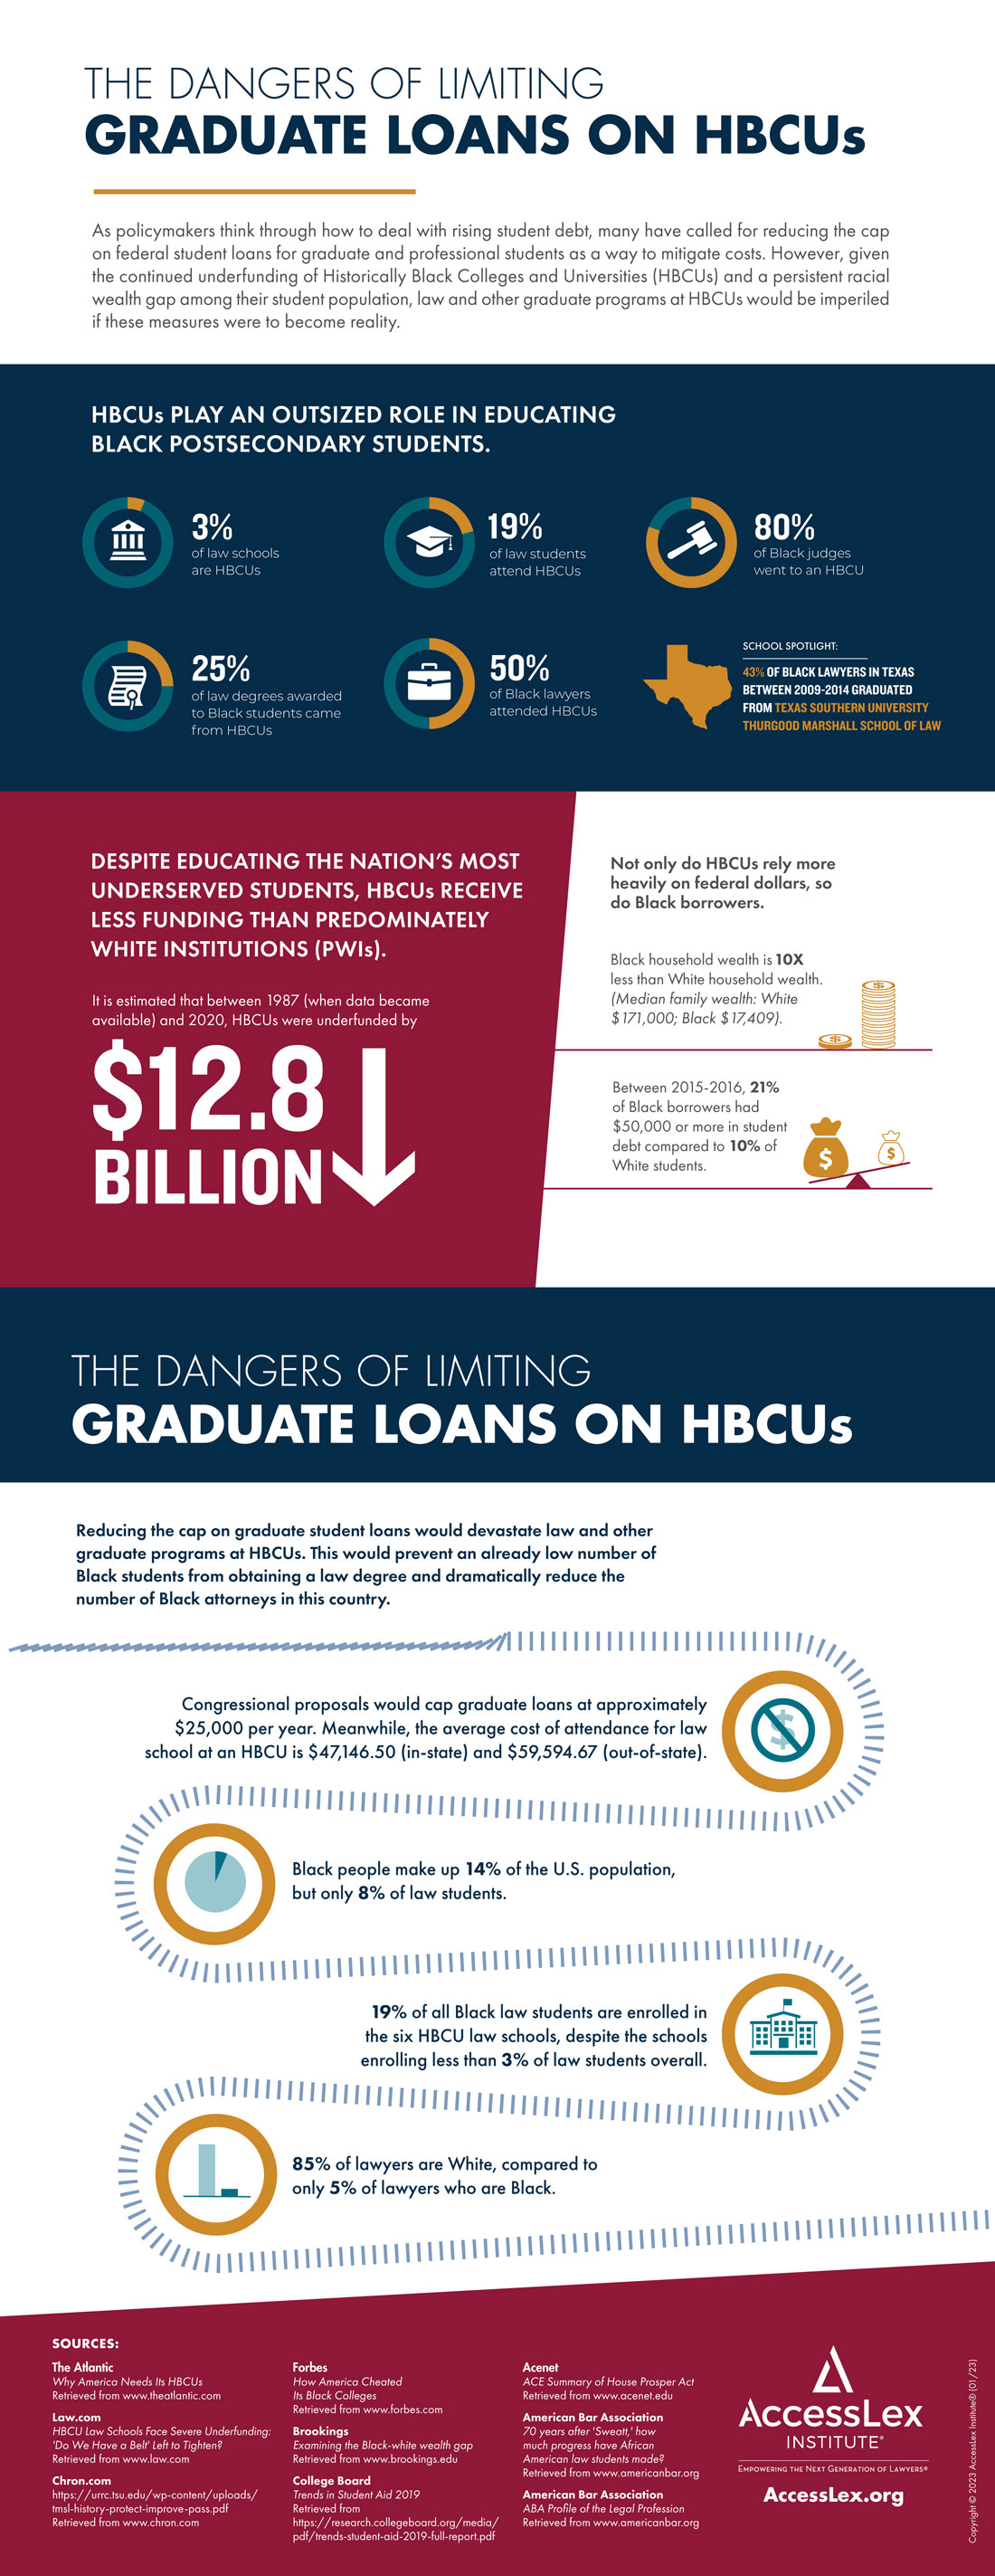 The Dangers of Limiting Graduate Loans on HBCUs – Infographic